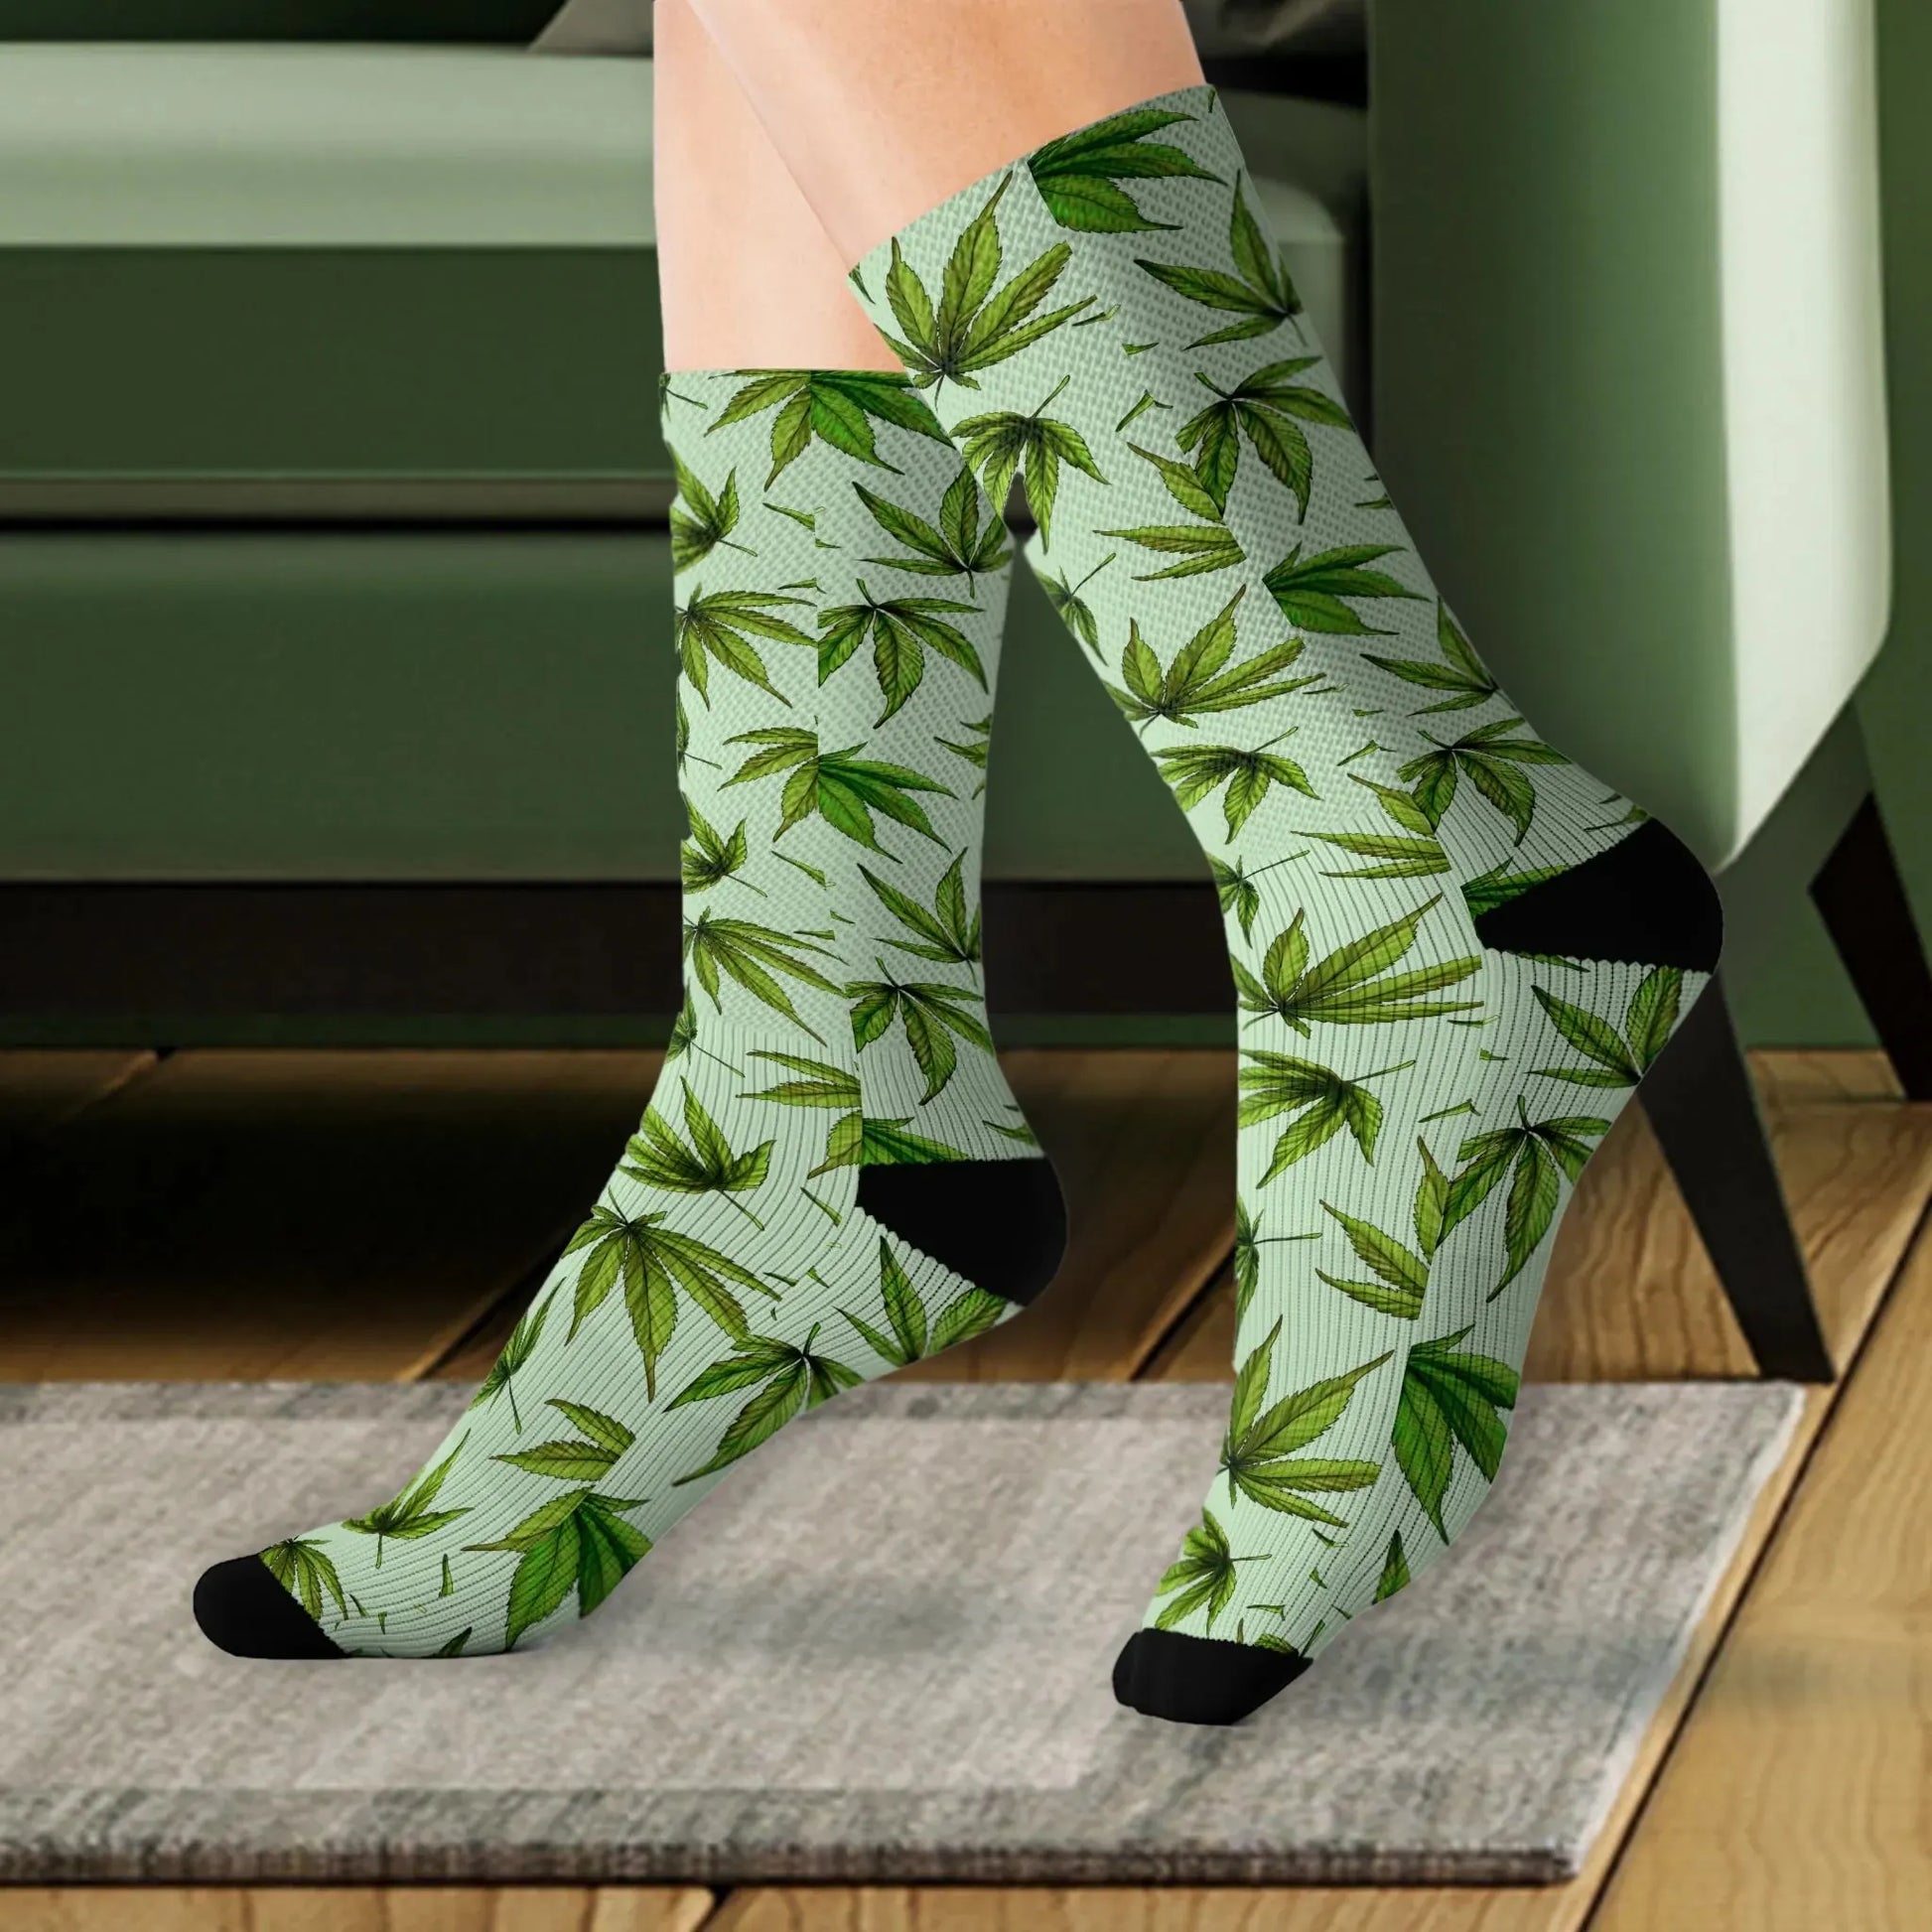 A close up of a person wearing green marijuana leaf weed socks on a rug